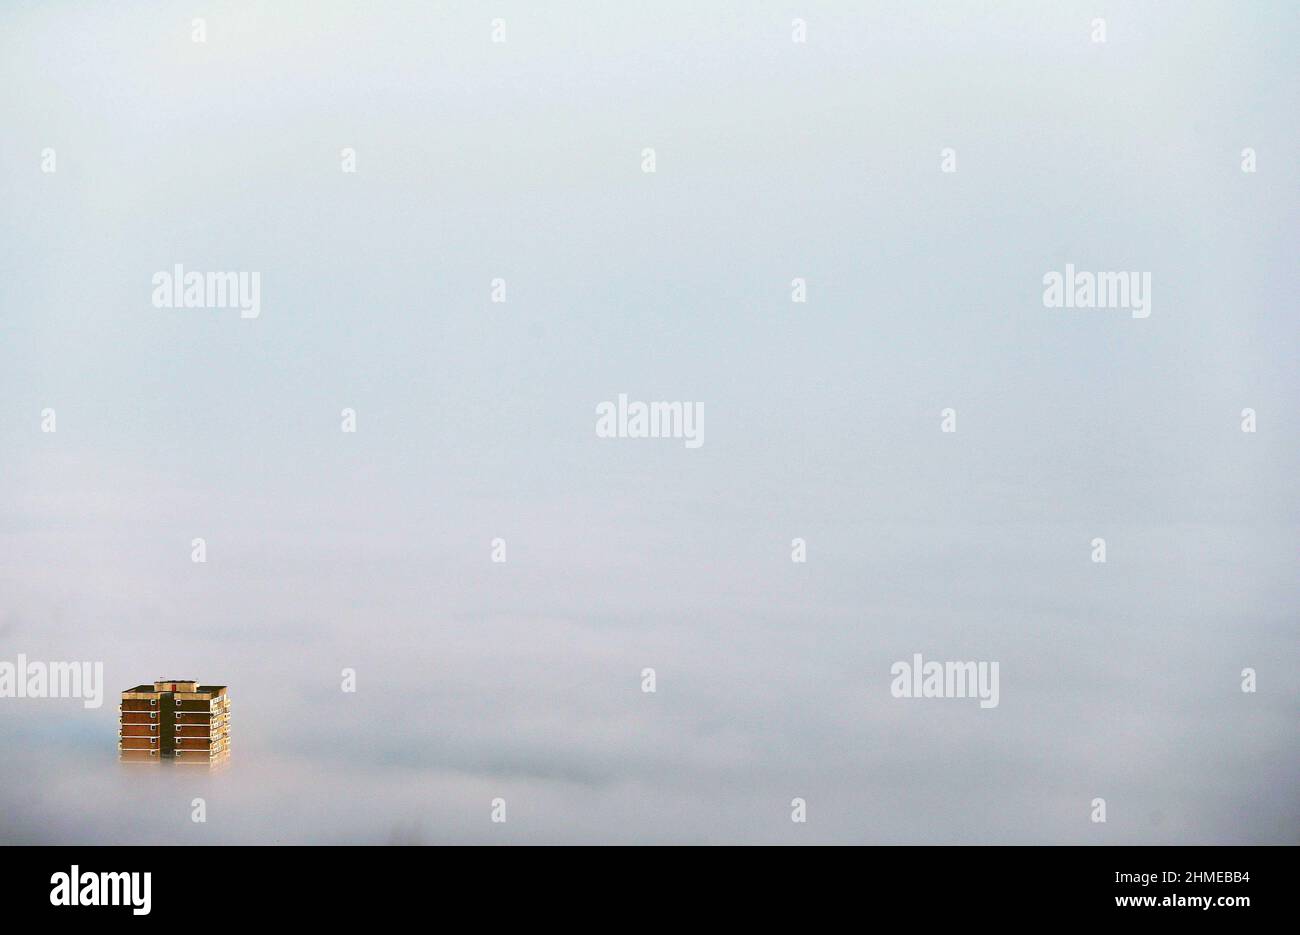 High rise flats and apartments surround by low lying clouds in Belfast, Northern Ireland. Stock Photo